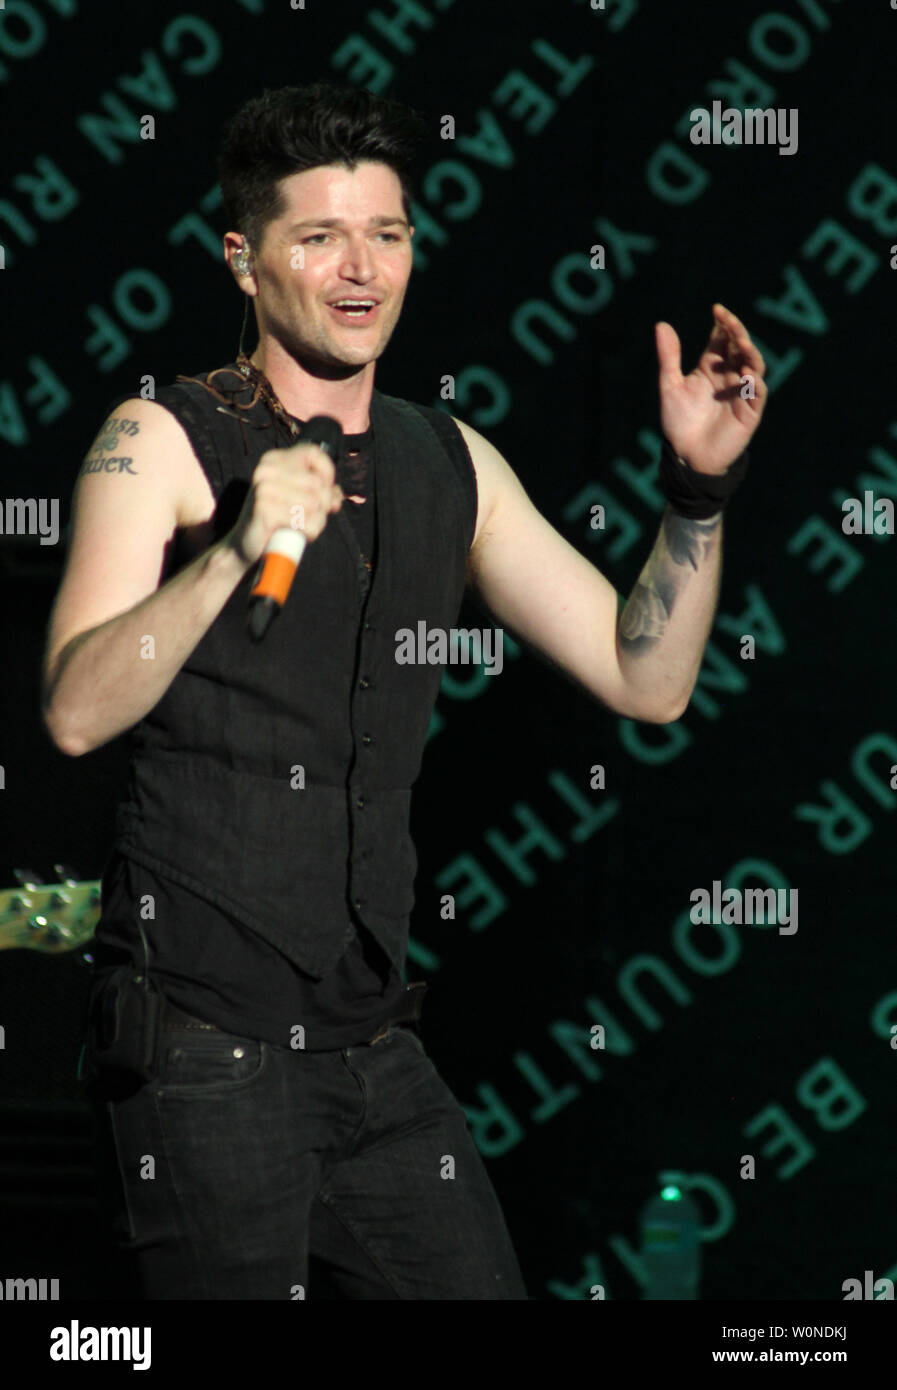 Danny O'Donoghue with The Script performs in concert at the Cruzan Amphitheatre in West Palm Beach, Florida on August 17, 2014. UPI/Michael Bush Stock Photo